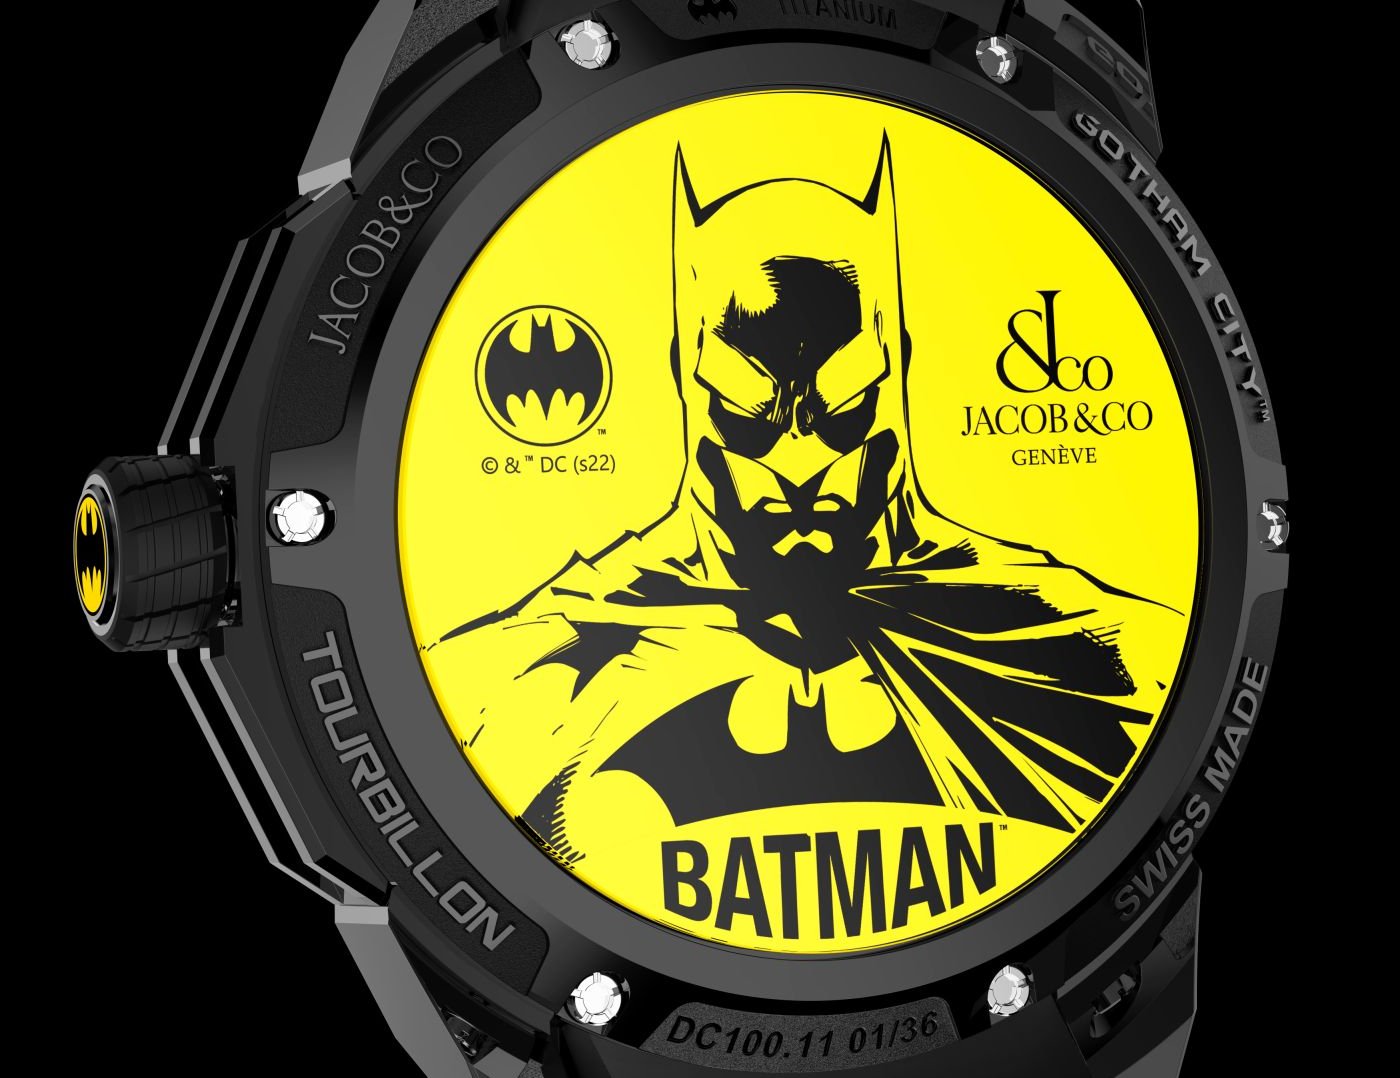 Jacob & Co. partners with Warner Bros. and DC for Gotham City timepiece 